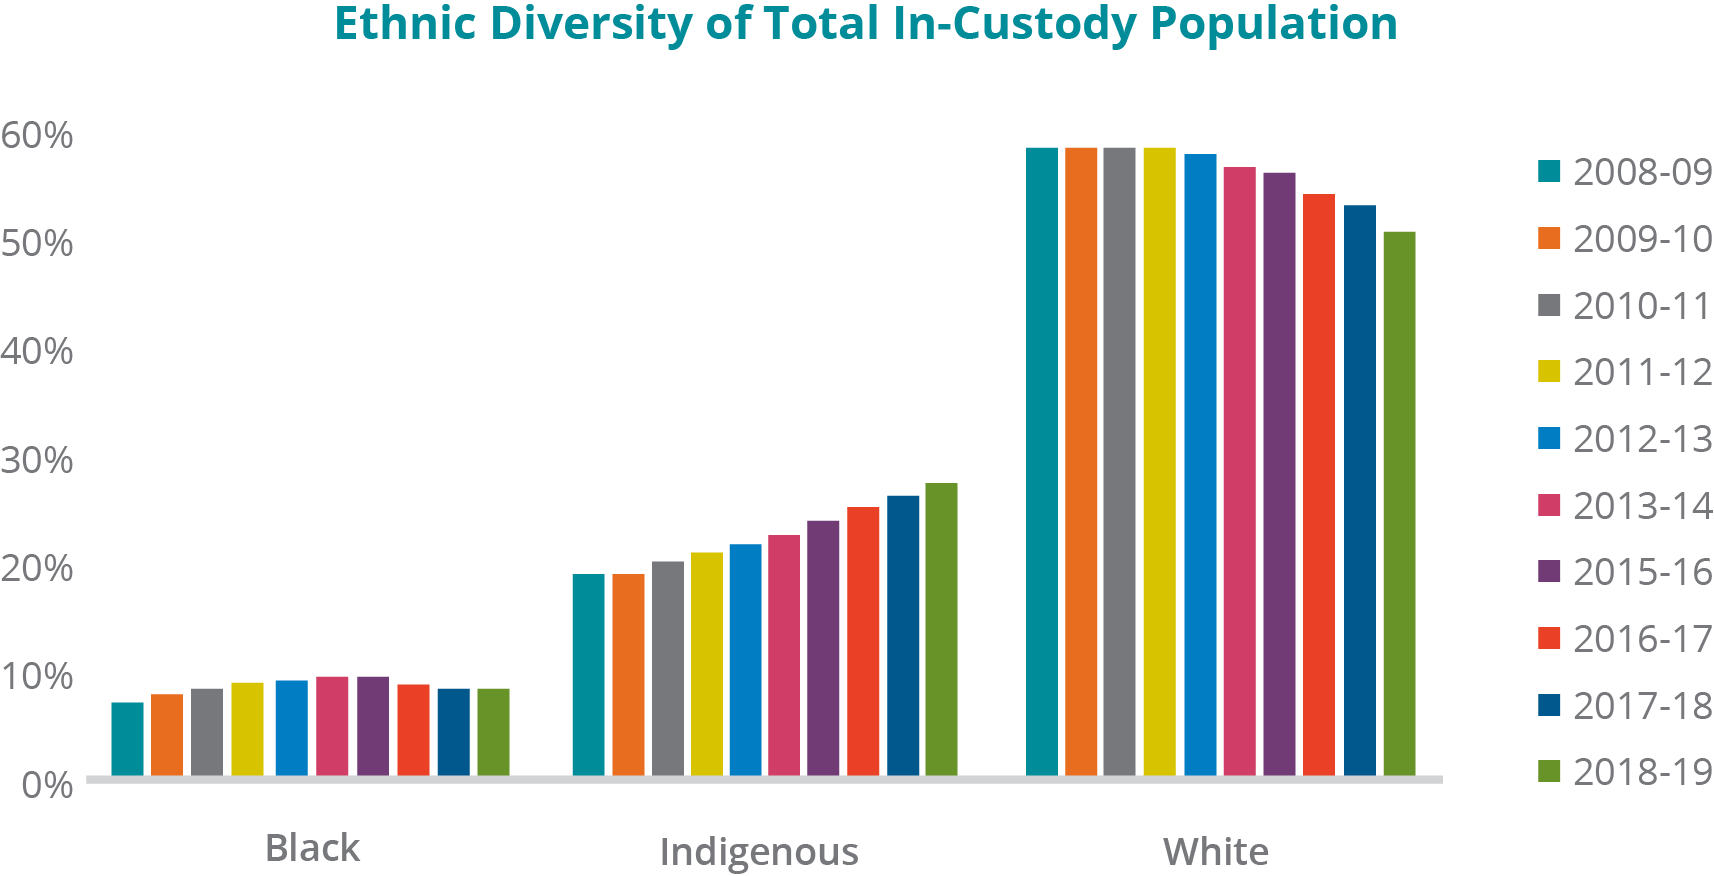 A graph depicting the ethnic diversity of total in-custody population from the fiscal years 2008-09 to 2018-19 -	Black inmates: In 2008-09, 7.14%; 2009-10, 7.81%; 2010-11, 8.29%; 2011-12, 8.99%; 2012-13, 9.13%; 2013-14, 9.57%; 2015-16, 9.73%; 2016-17, 8.97%; 2017-18, 8.58%; and 2018-19, 8.37%. -	Indigenous inmates: In 2008-09, 19.41%; 2009-10, 19.58%; 2010-11, 20.54%; 2011-12, 21.52%; 2012-13, 22.31%; 2013-14, 23.07%; 2015-16, 24.57%; 2016-17, 25.71%; 2017-18, 26.82%; and 2018-19, 27.80%. -	White inmates: In 2008-09, 66.38%; 2009-10, 65.31%; 2010-11, 63.79%; 2011-12, 61.37%; 2012-13, 59.32%; 2013-14, 57.97%; 2015-16, 57.44%; 2016-17, 55.35%; 2017-18, 54.00%; and 2018-19, 51.99%. Note: Data was not available for 2014-15 fiscal year from CSC's Data Warehouse. Other ethnic groups were excluded as their numbers were too small in comparison.